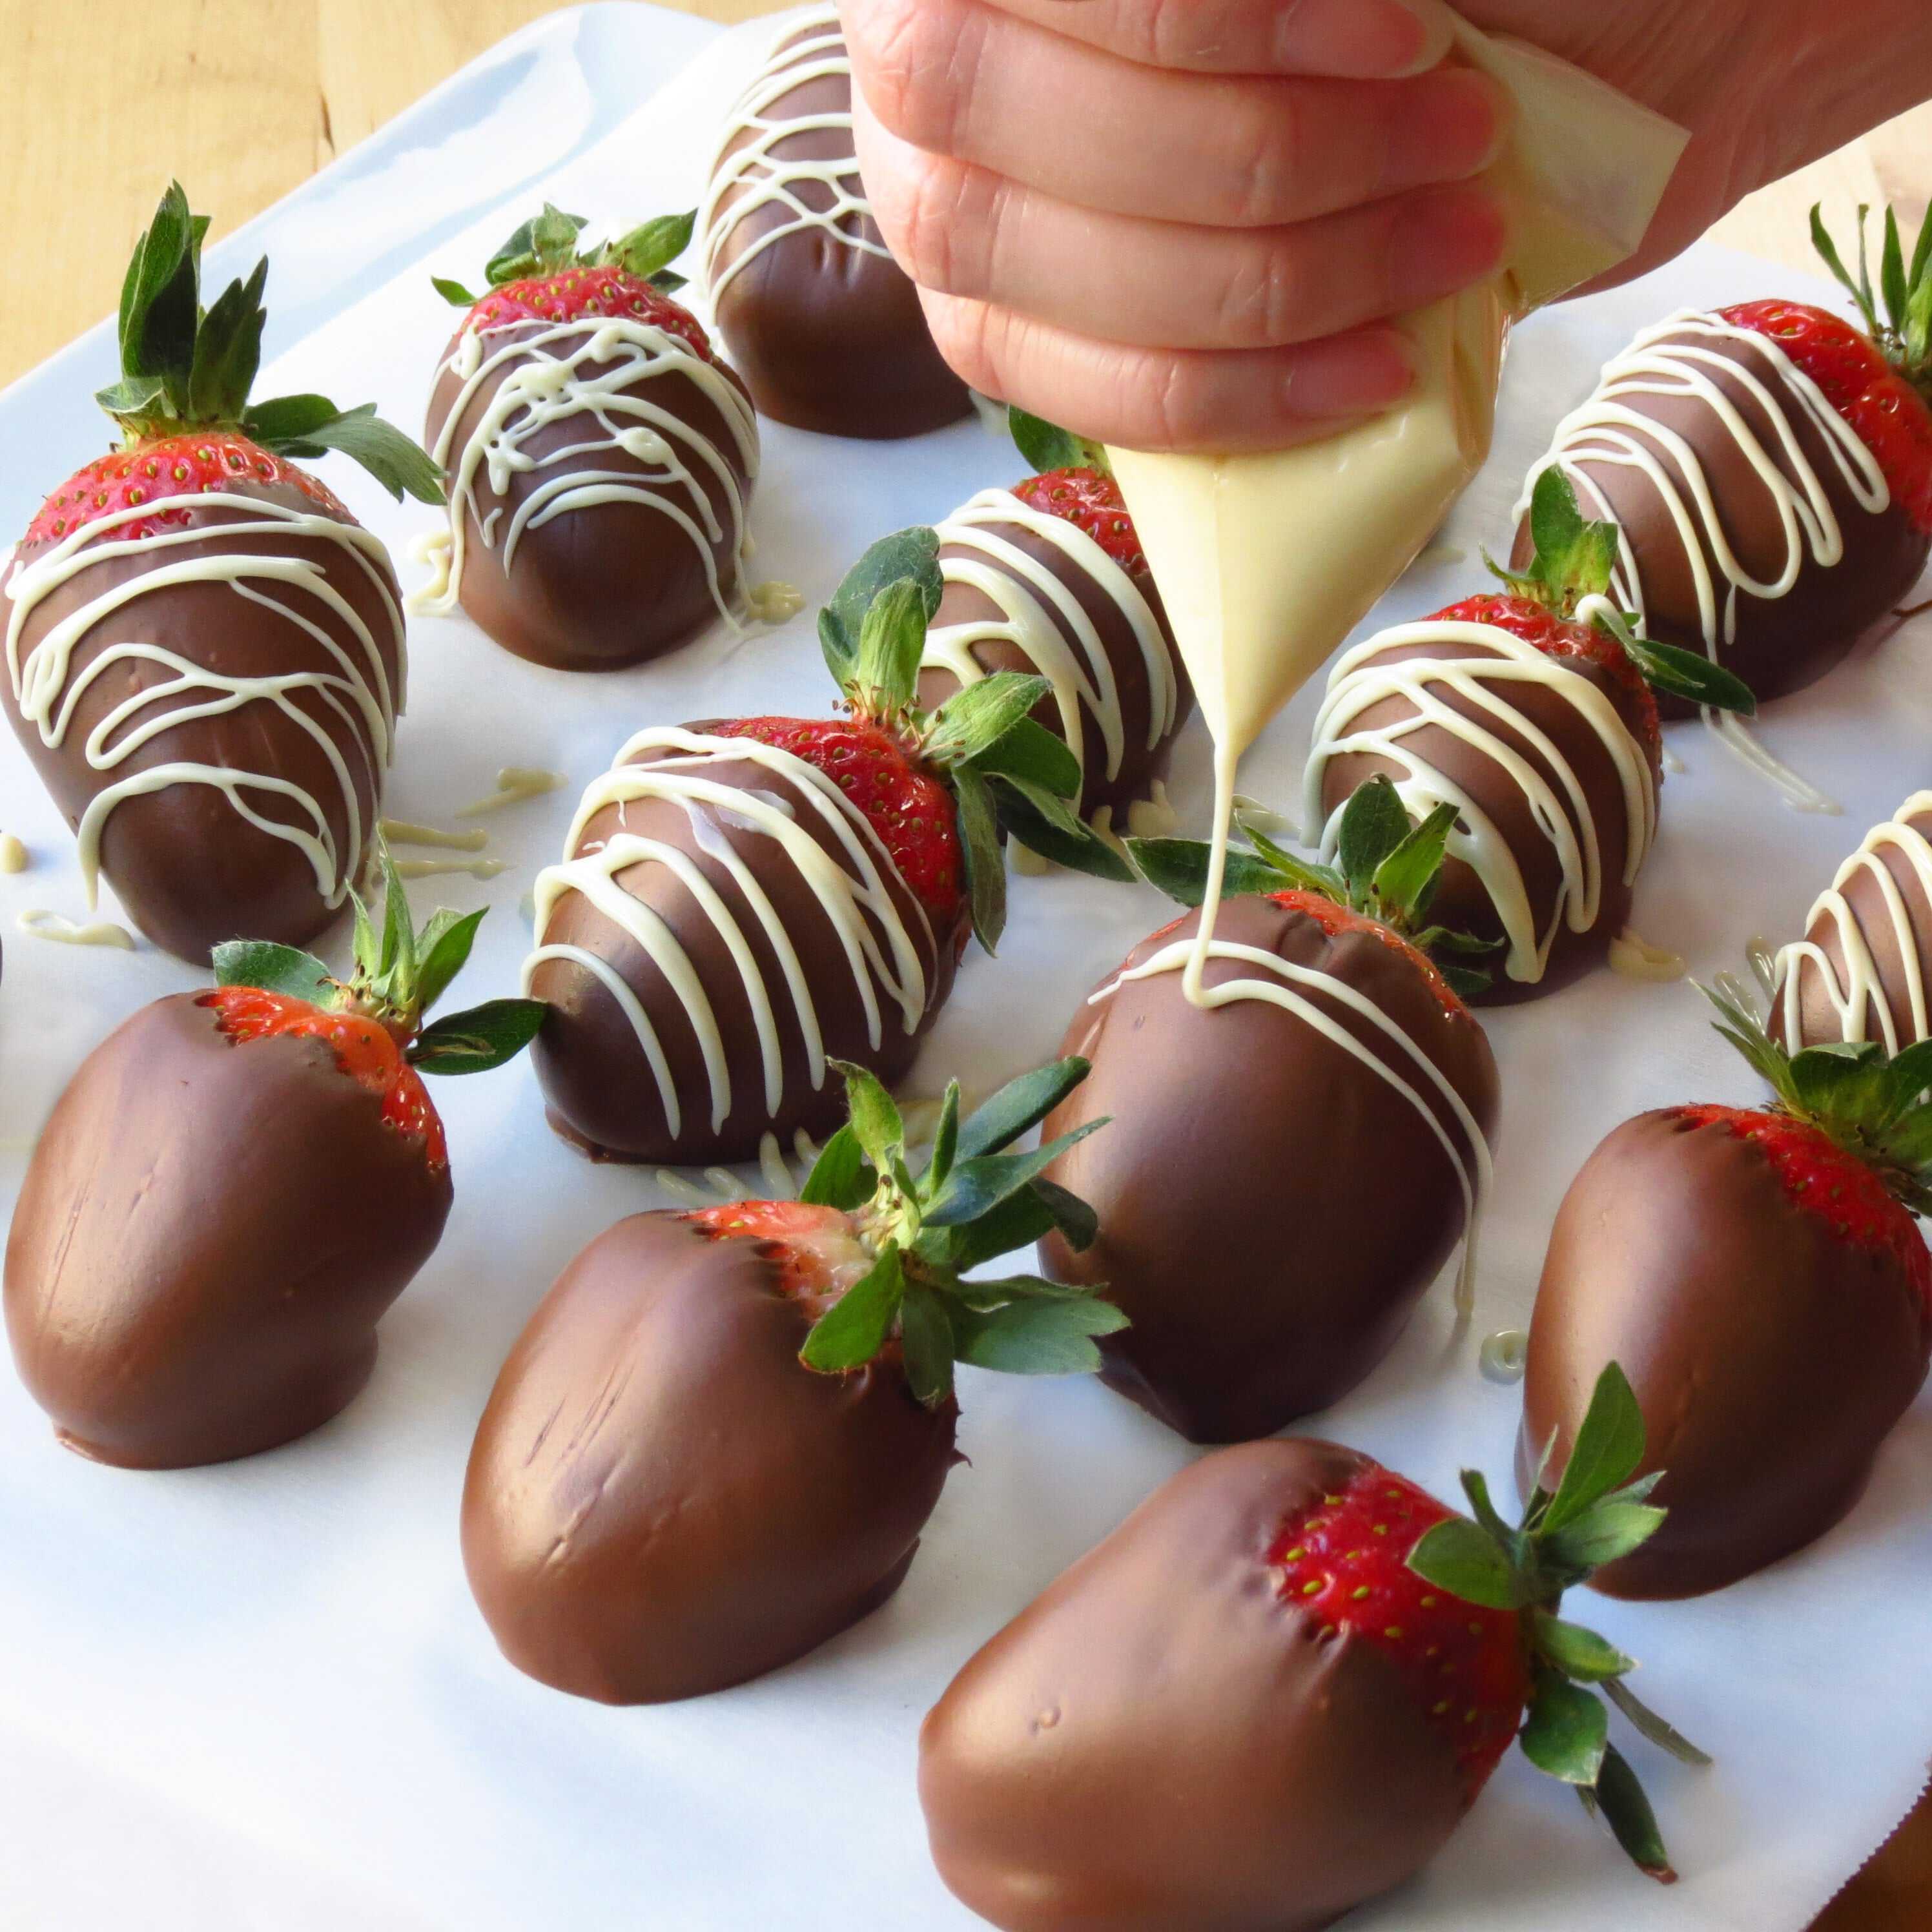 Drizzling white chocolate onto Chocolate Covered Strawberries